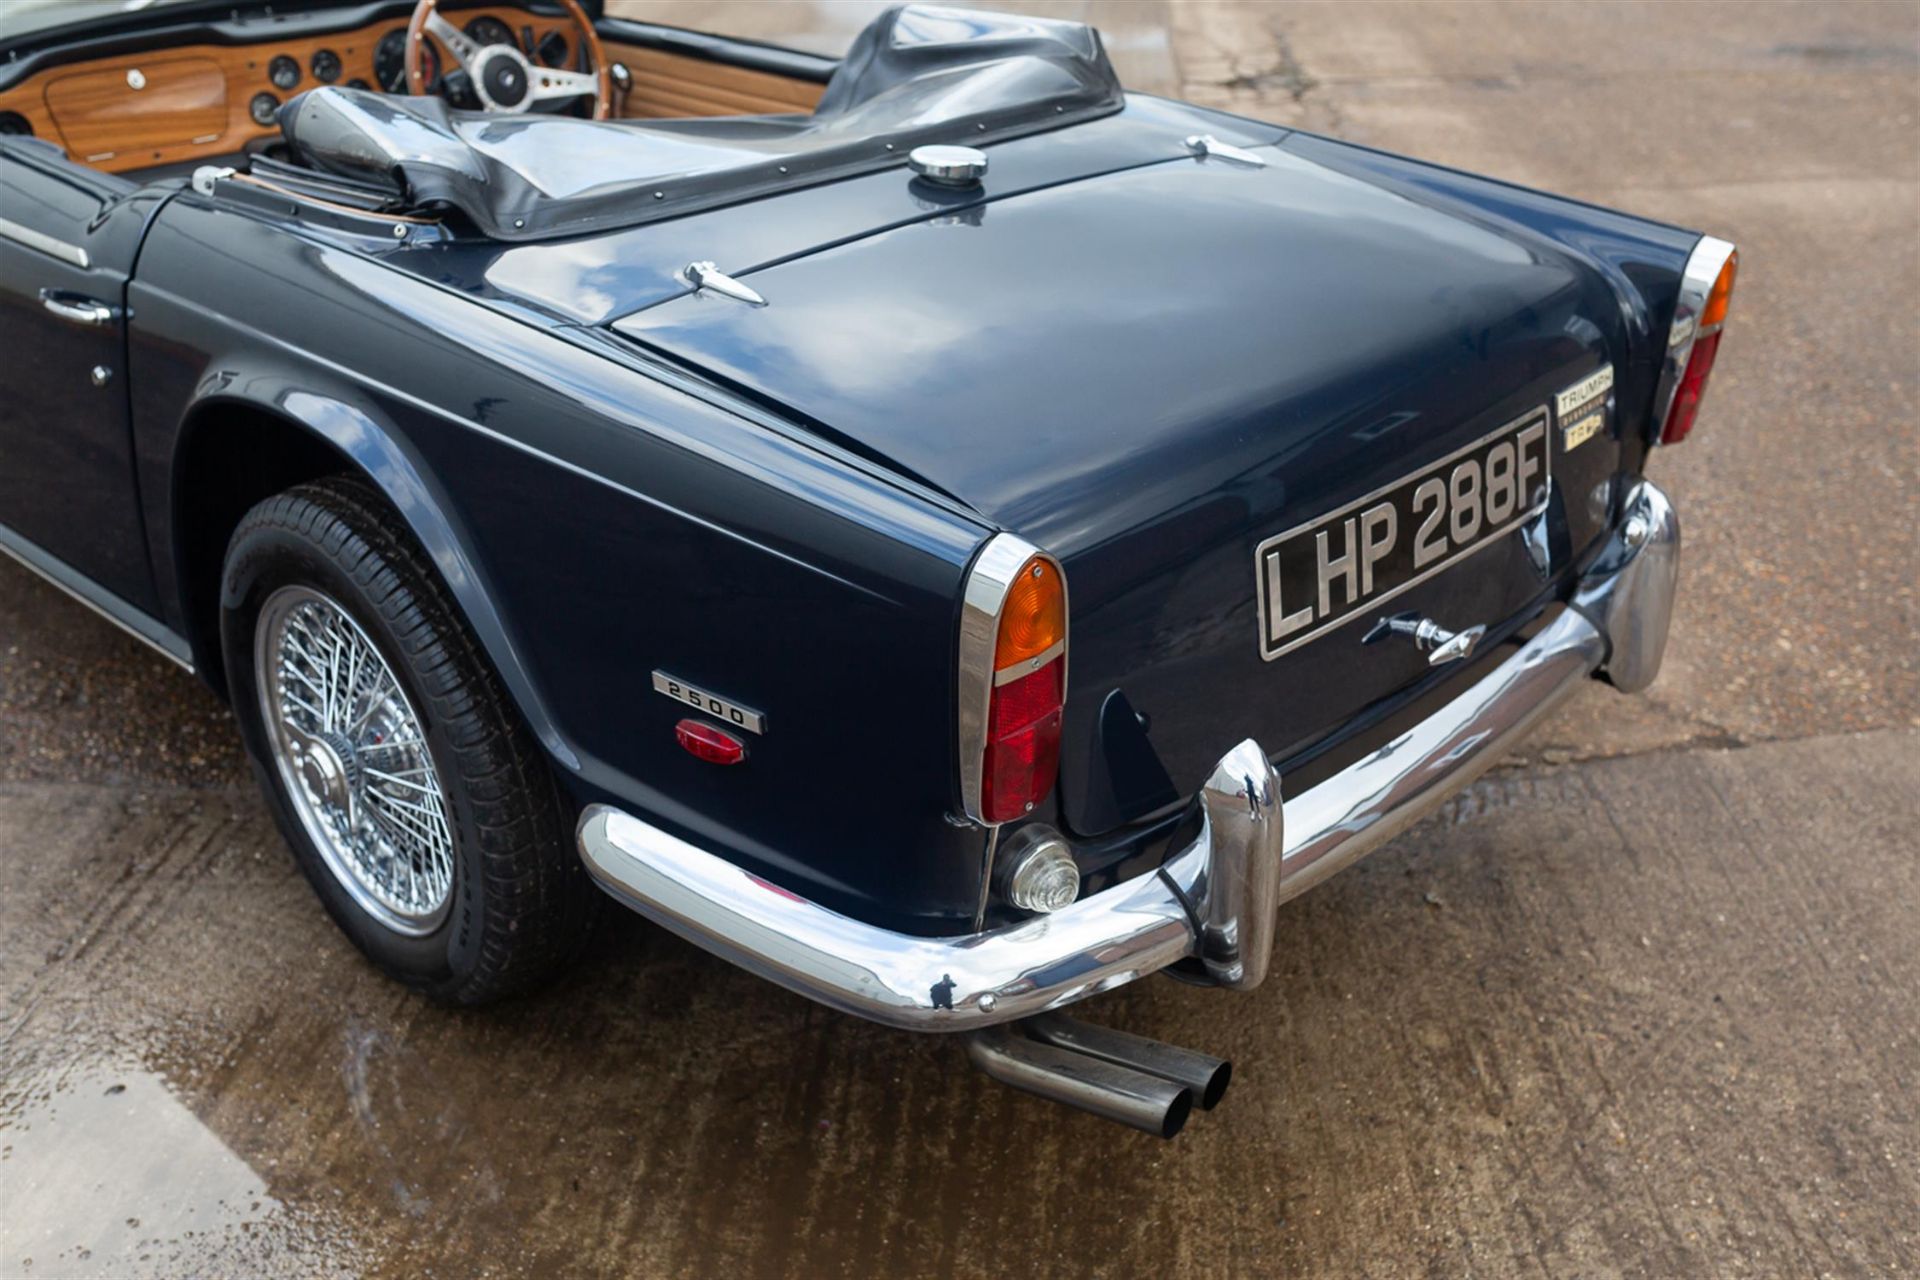 1967 Triumph TR5 - The First Ever TR5 - Image 9 of 10